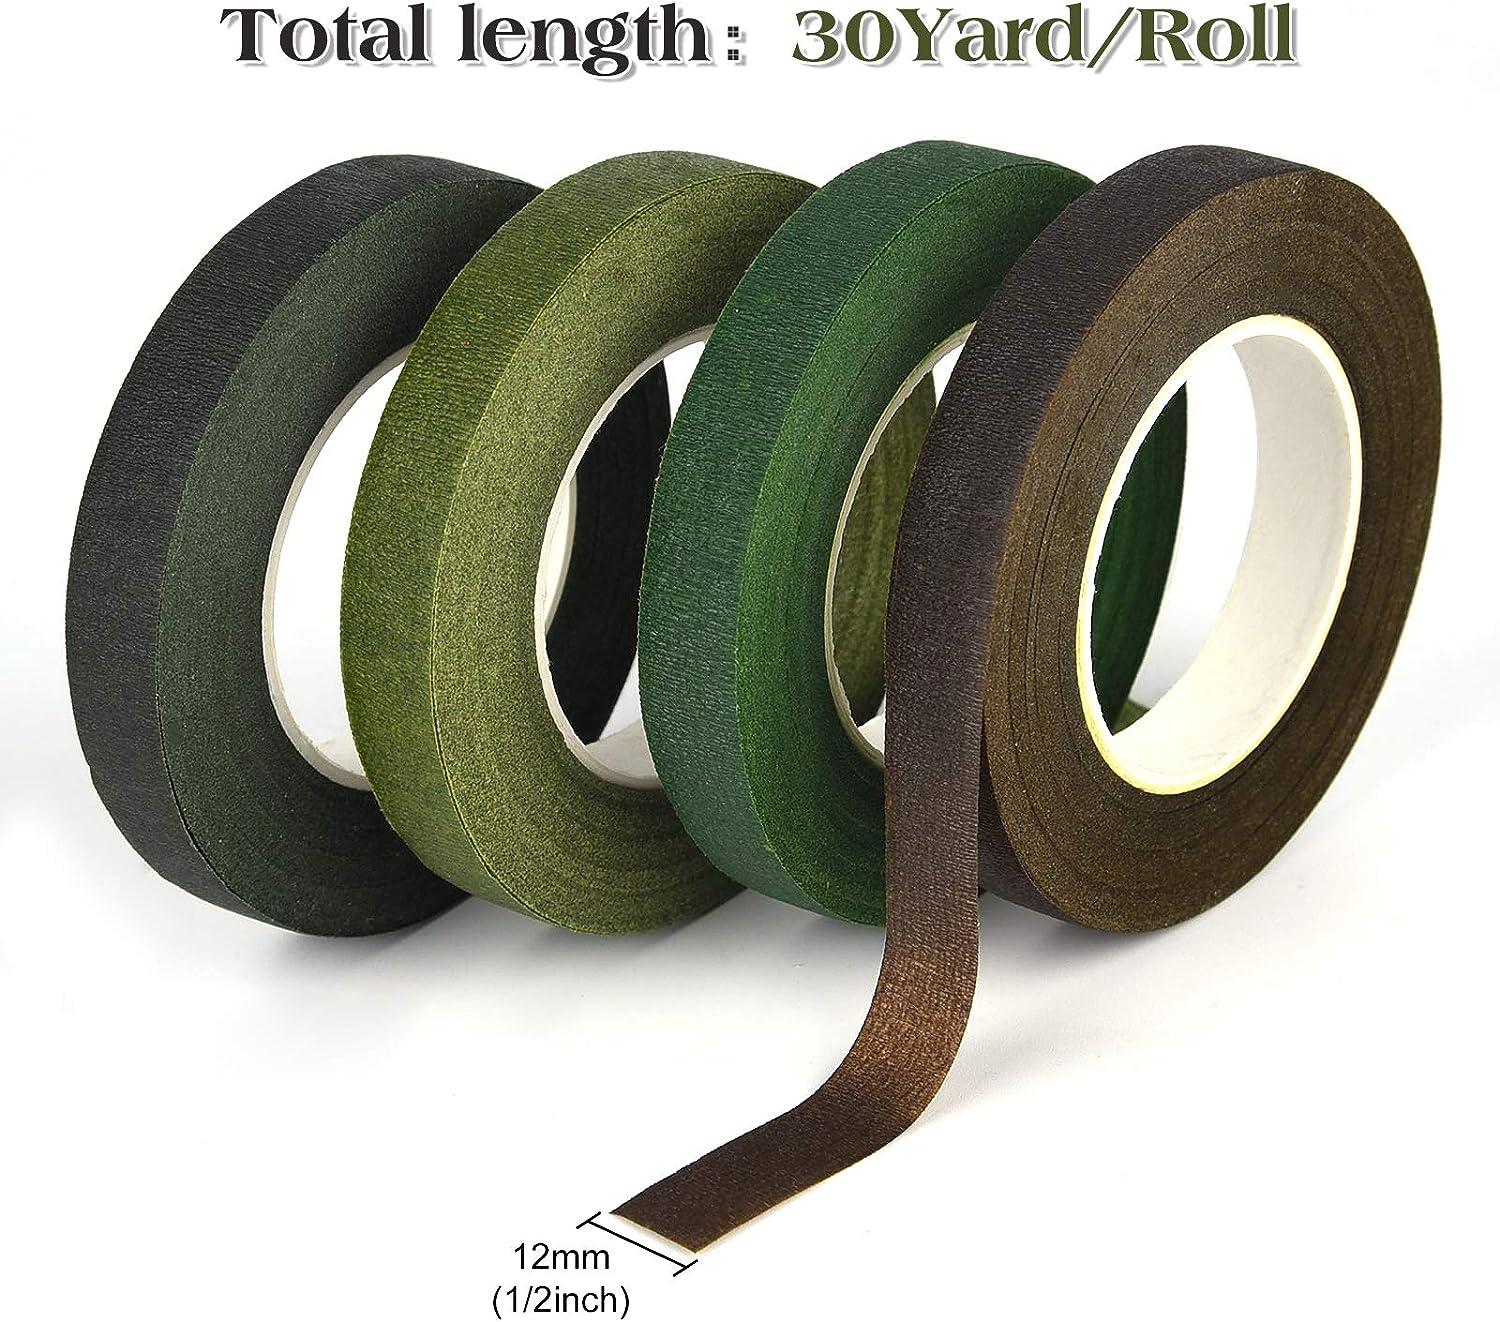 KUUQA 4 Rolls 1/2 Wide Floral Tapes for Bouquet Stem Wrapping and Floral  Crafts Wedding Bouquet Dark Green Light Green Grass Green Dark Brown Mix  Color